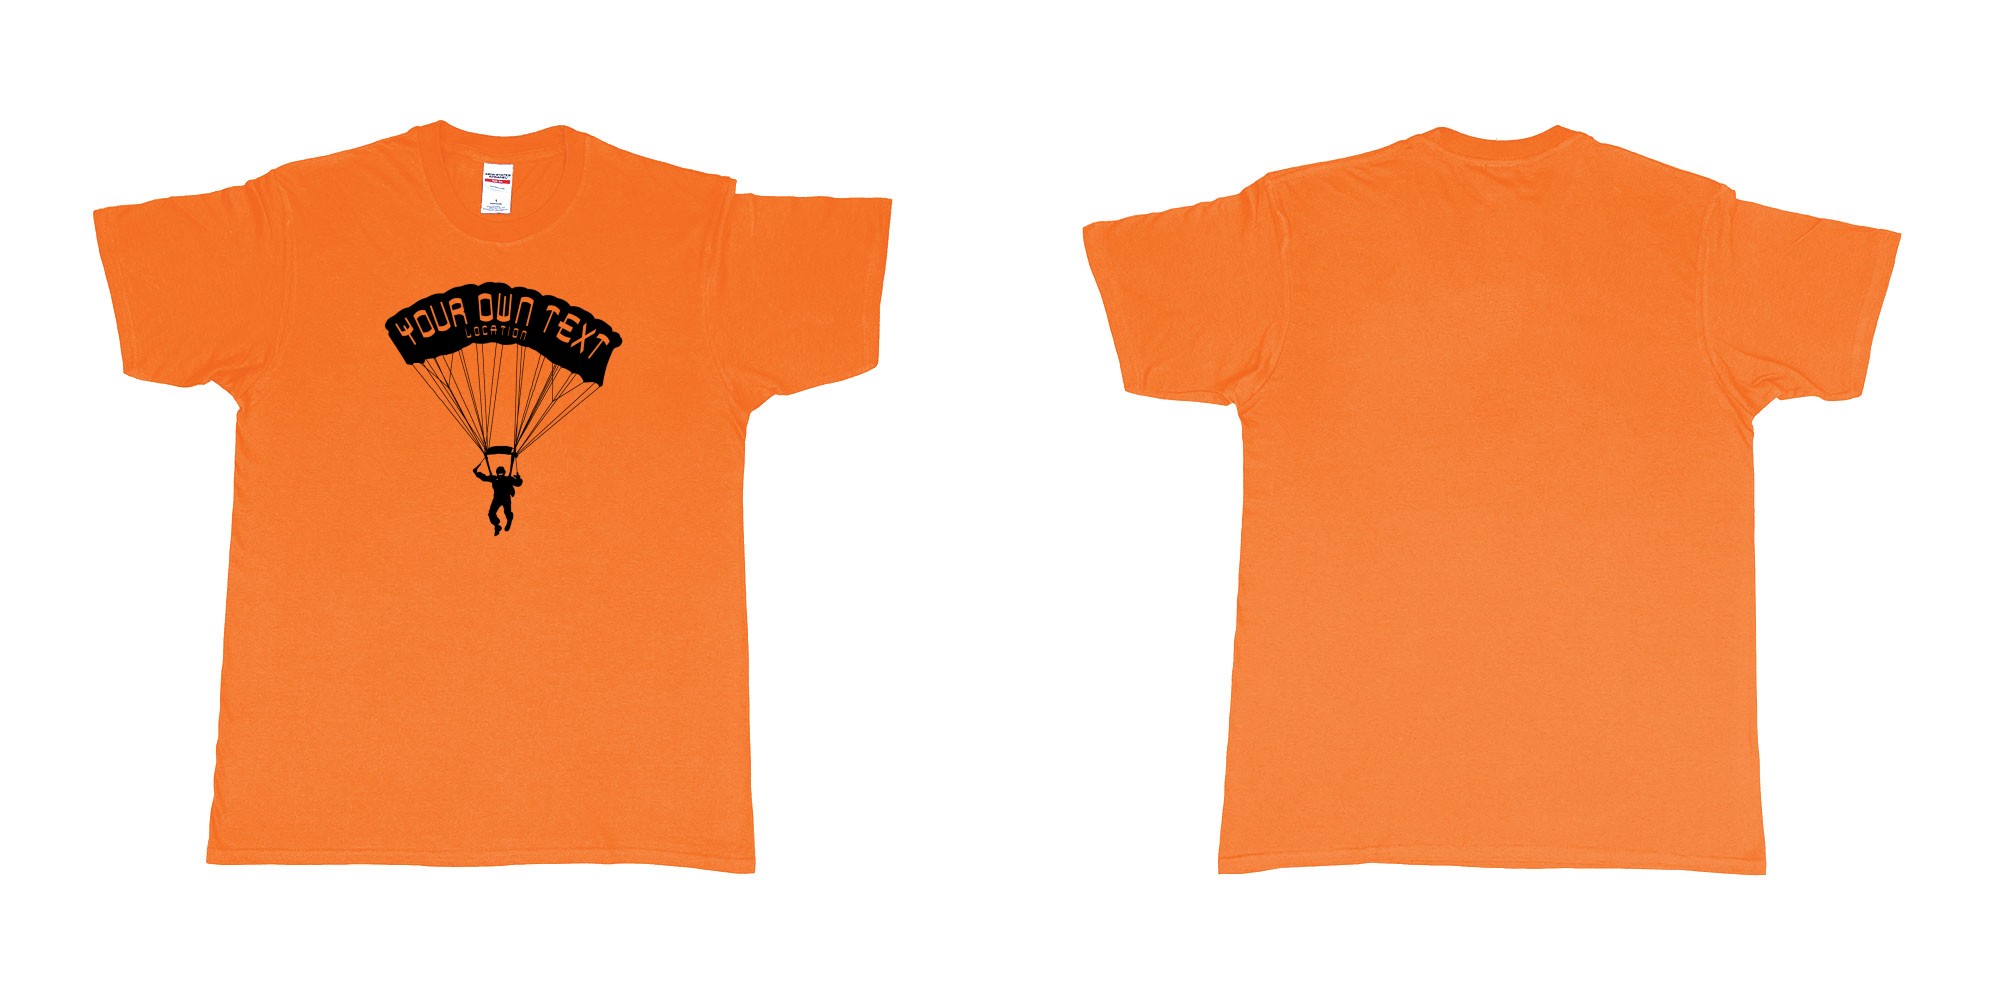 Custom tshirt design skydiver club custom print in fabric color orange choice your own text made in Bali by The Pirate Way